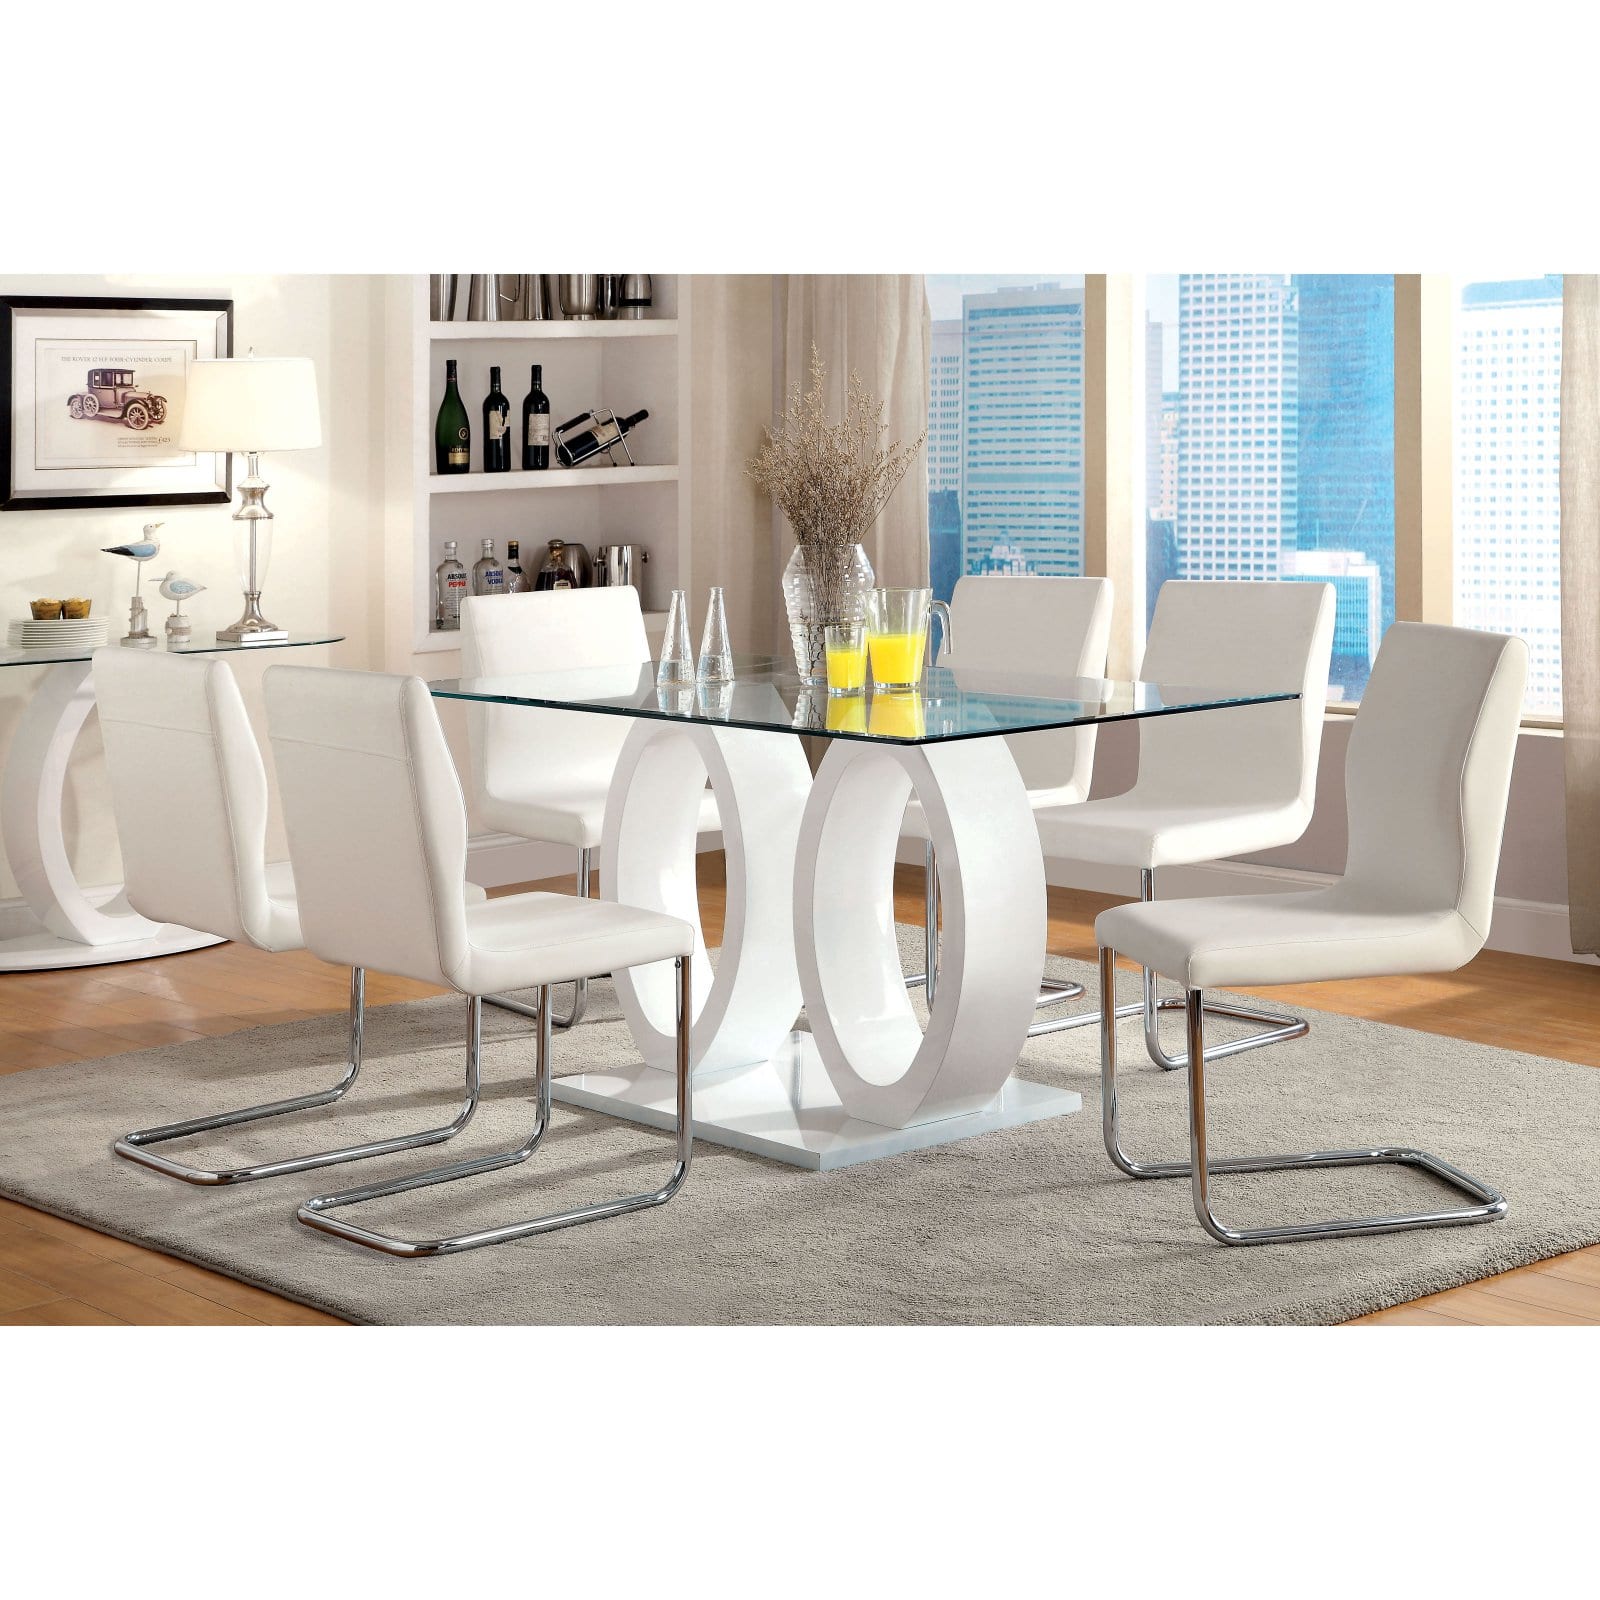 Furniture of America Damore Contemporary High Gloss Dining Table - image 1 of 9